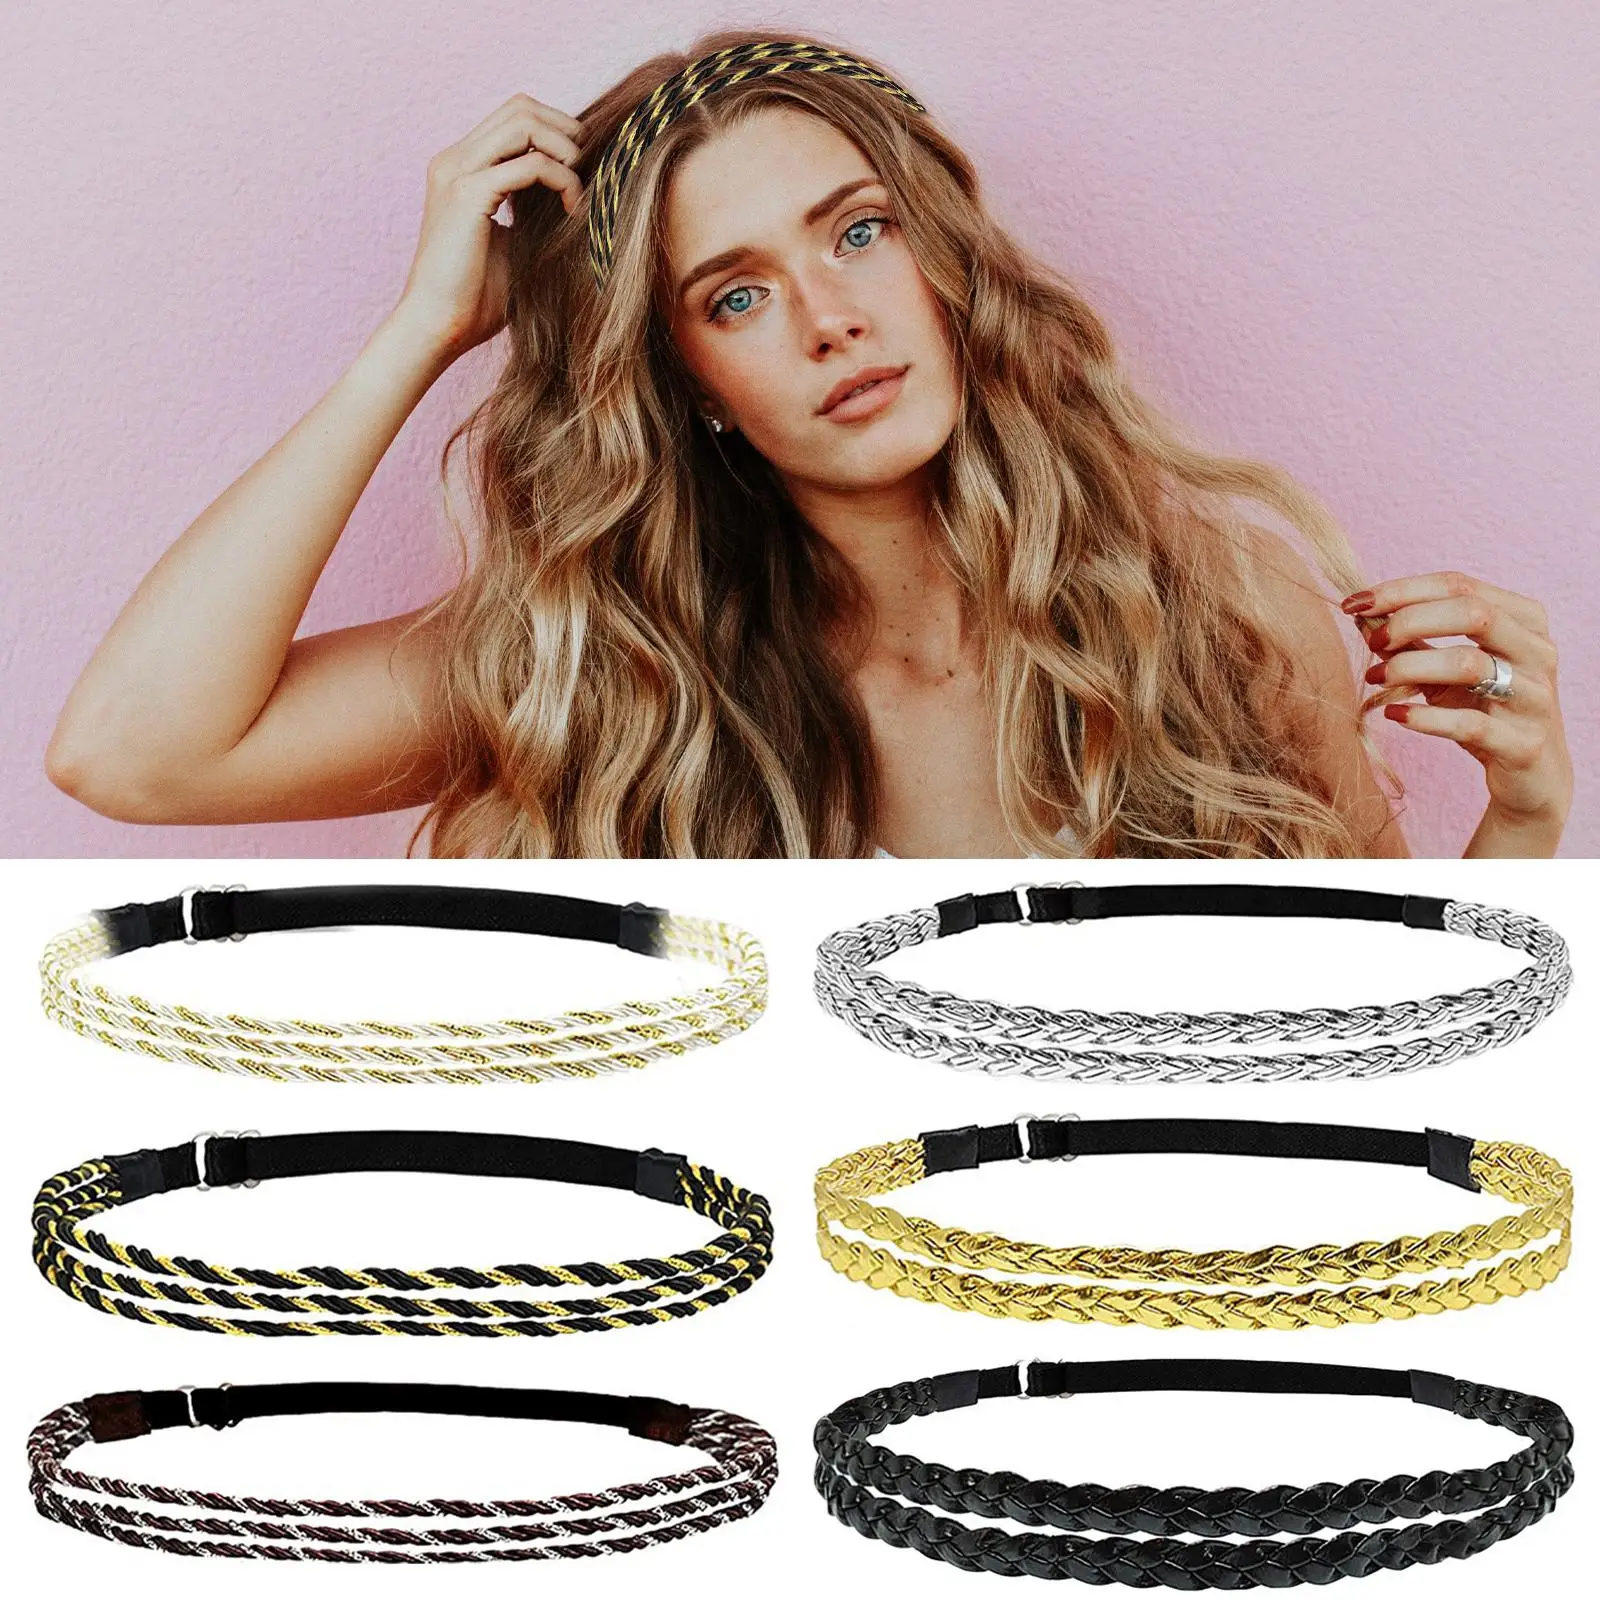 6 Pieces Braided Headbands with Double Braided and Triple Strand Bohemian Style Plaited No Slip Hair Band for Girl Women Running